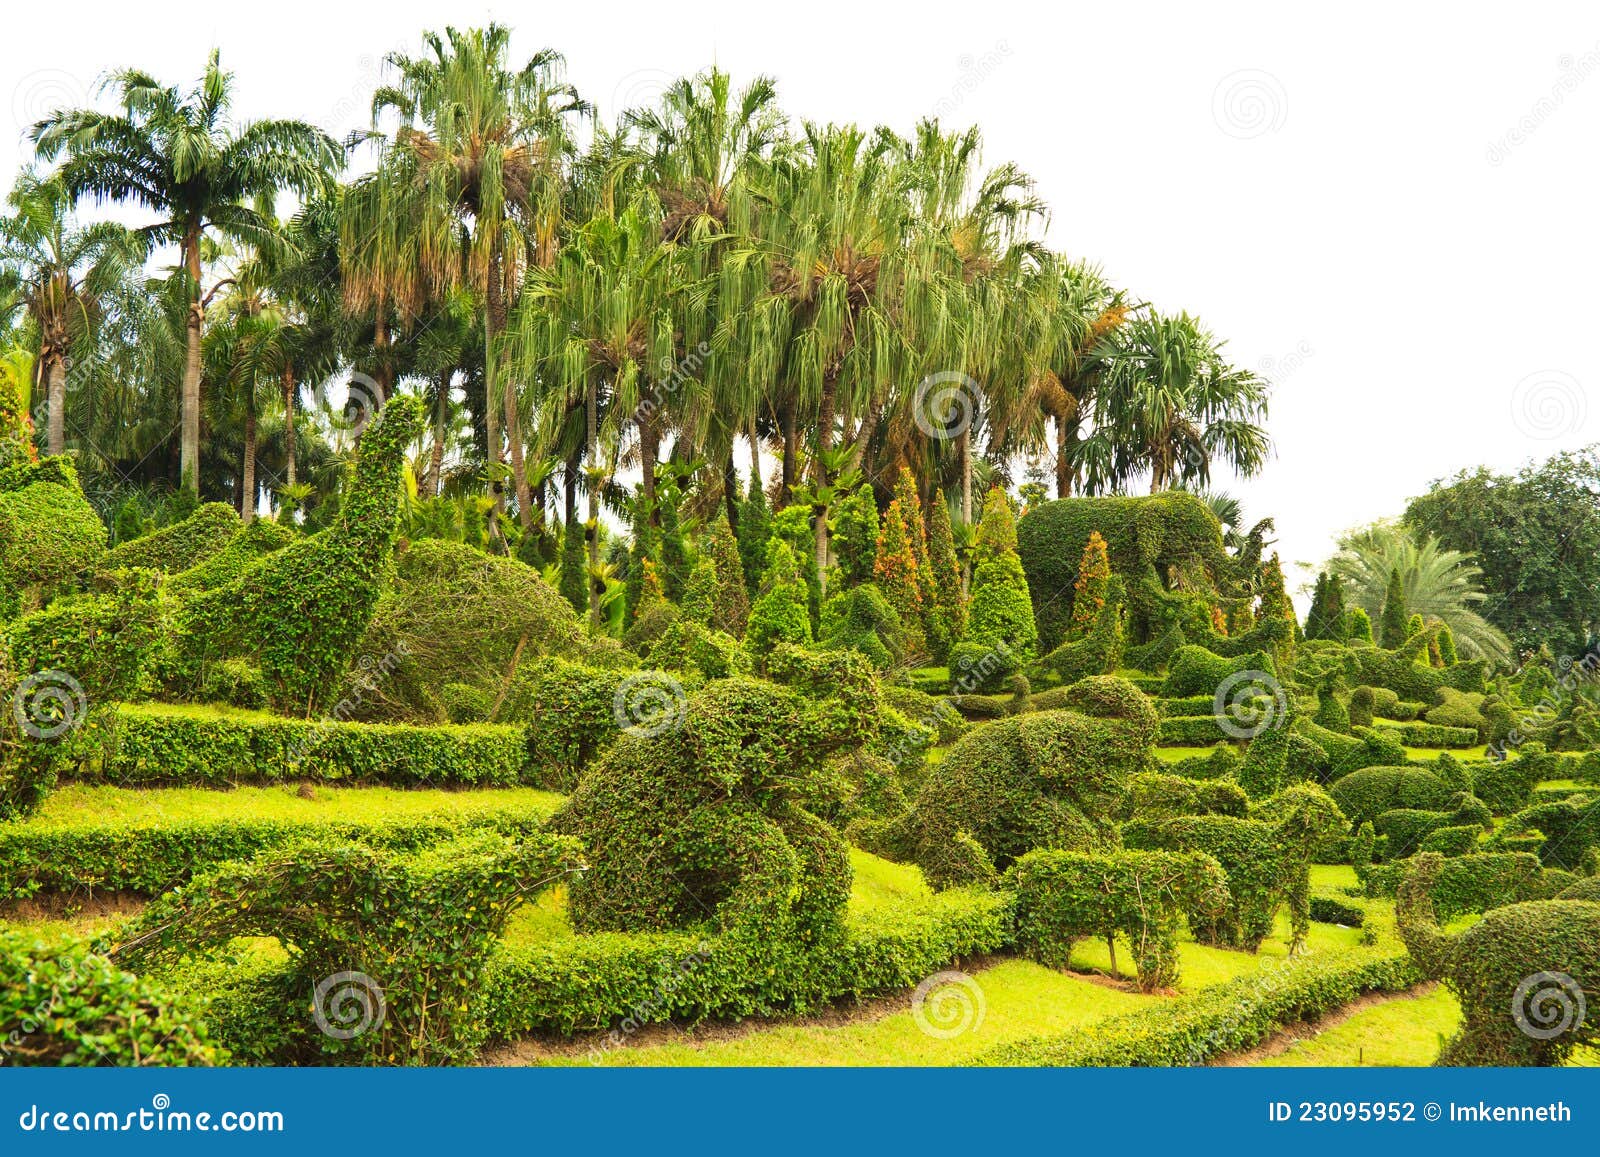 Garden With Animal Shaped Design Stock Photography - Image: 23095952